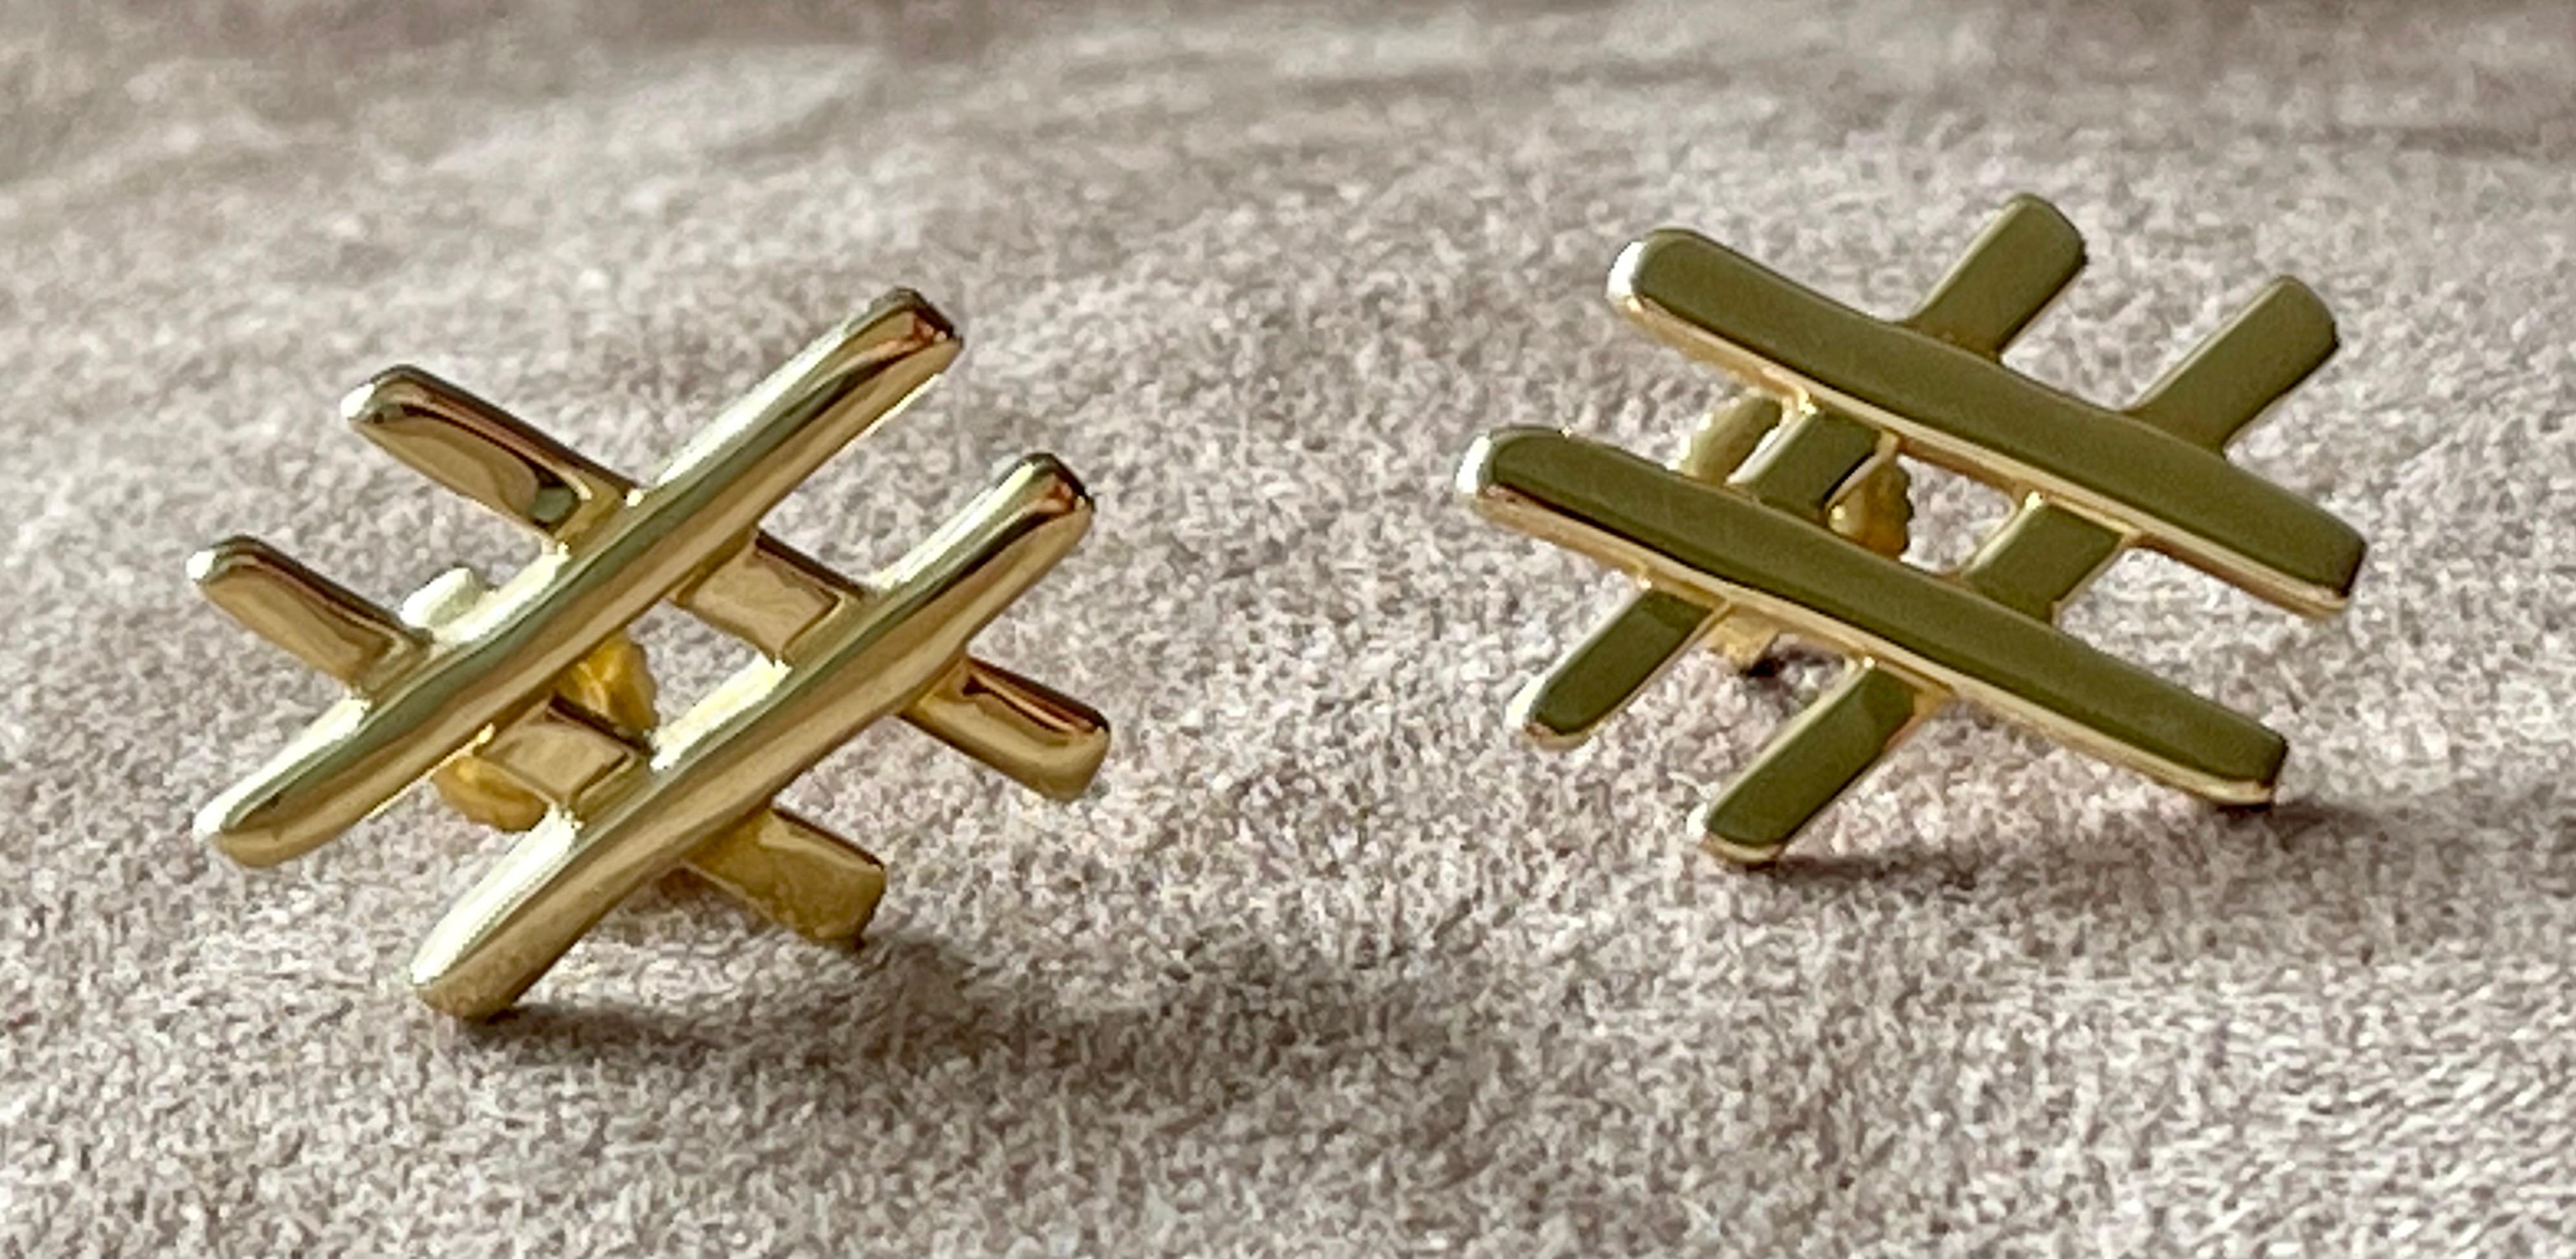 We are  pleased to offer these Tiffany & Co. Paloma Picasso 18k Yellow Gold earstuds. Paloma Picasso is one of the most celebrated designers at Tiffany & Co. Her creative use of materials and designs are iconic. The earrings are in excellent